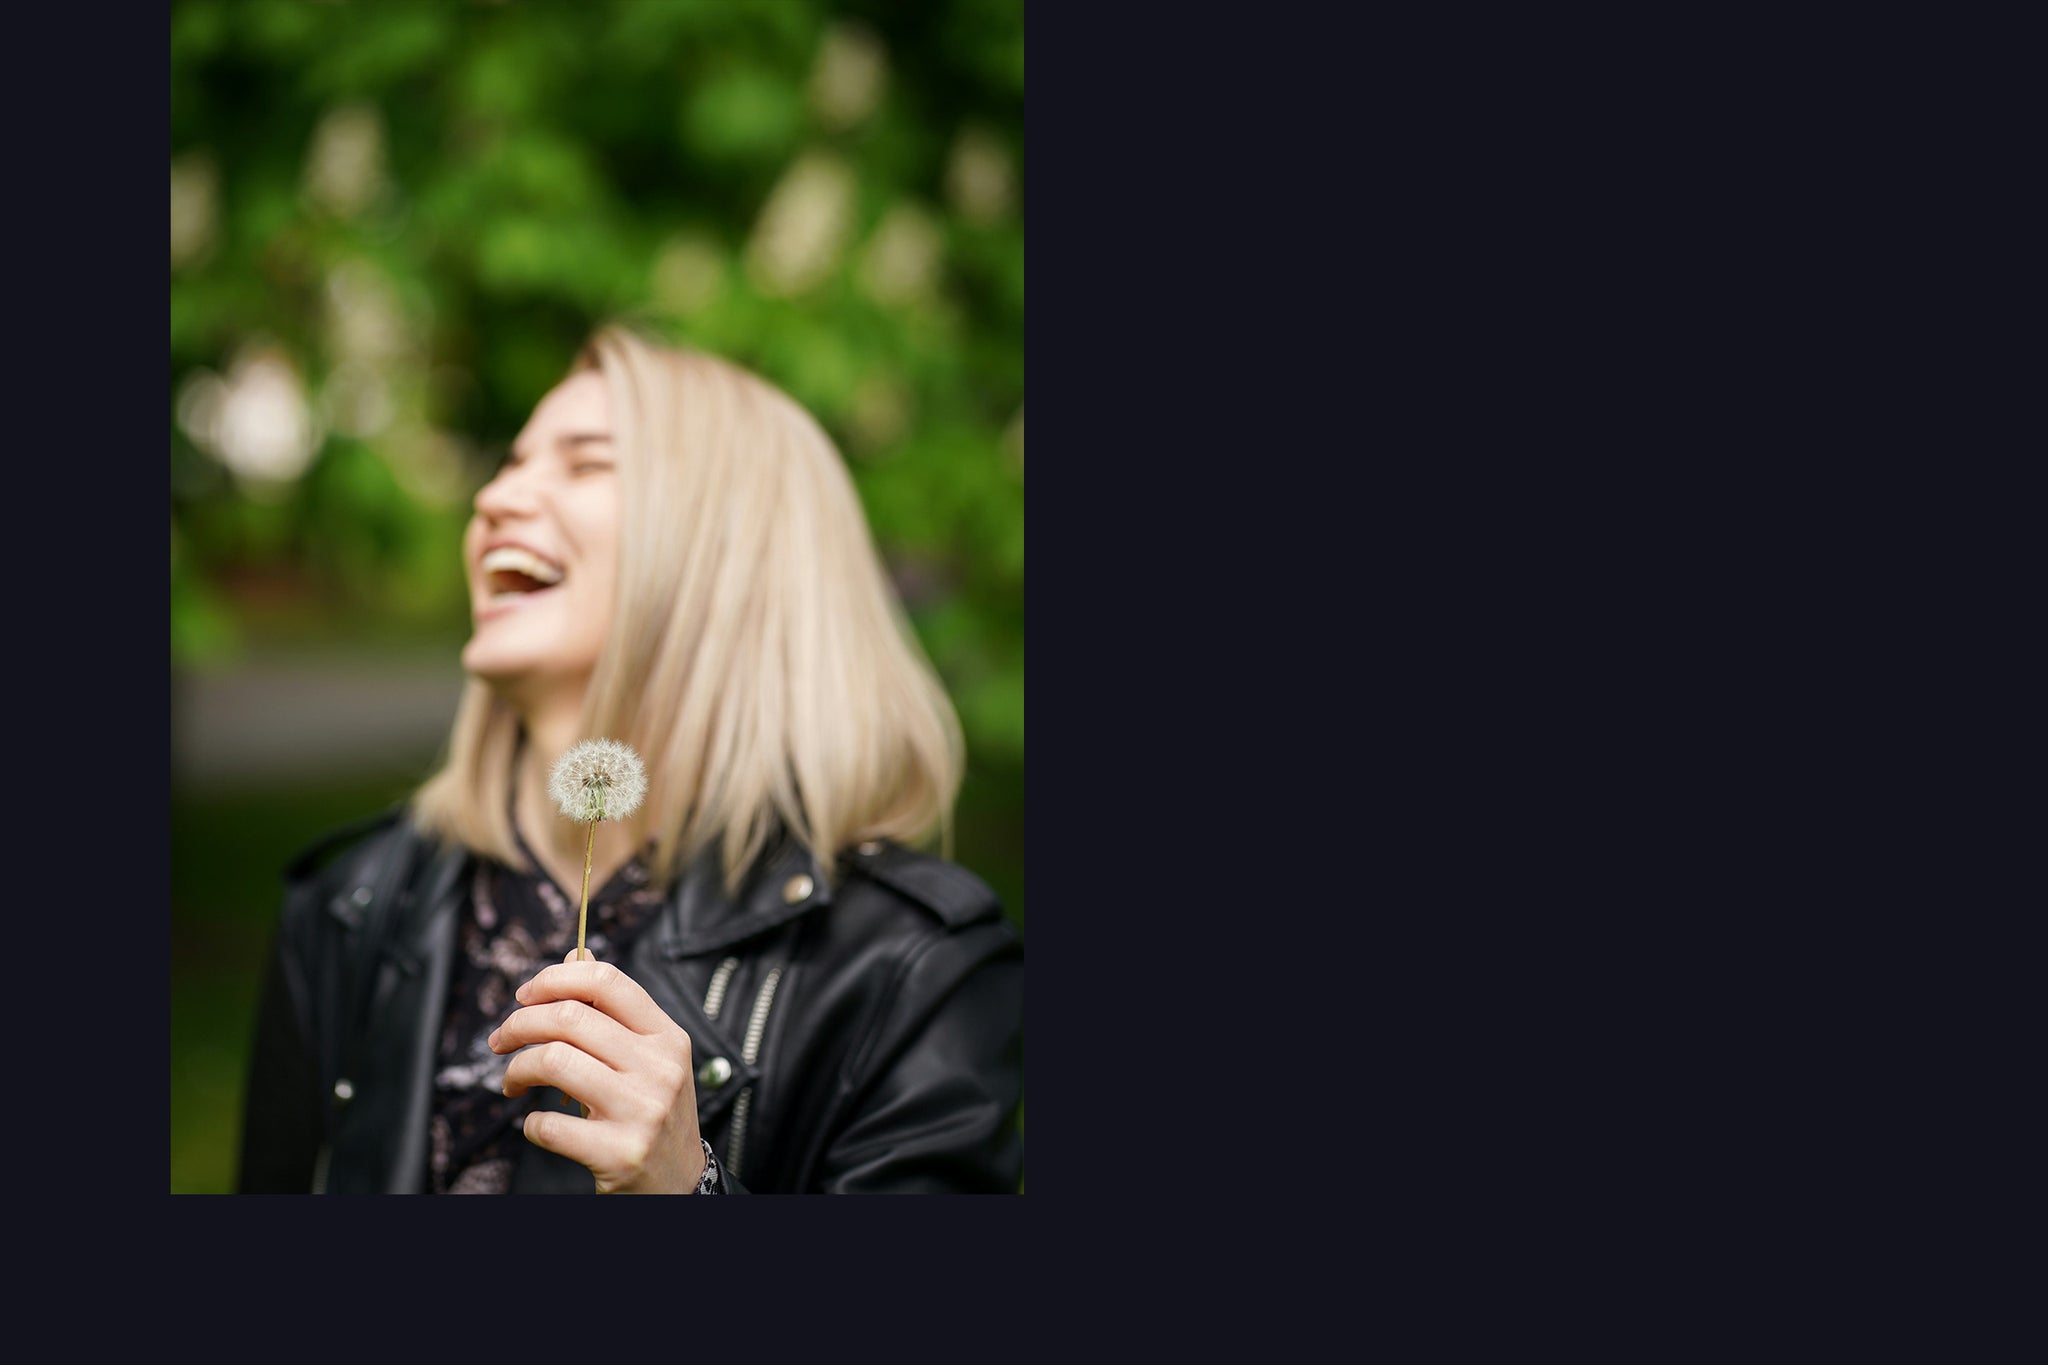 A girl in a leather motorcycle jacket laughing while holding a dandelion enjoying a chilly spring day, enjoying the smell of oakmoss covered trees.  A simple moment that will ignite memories for years to come! 